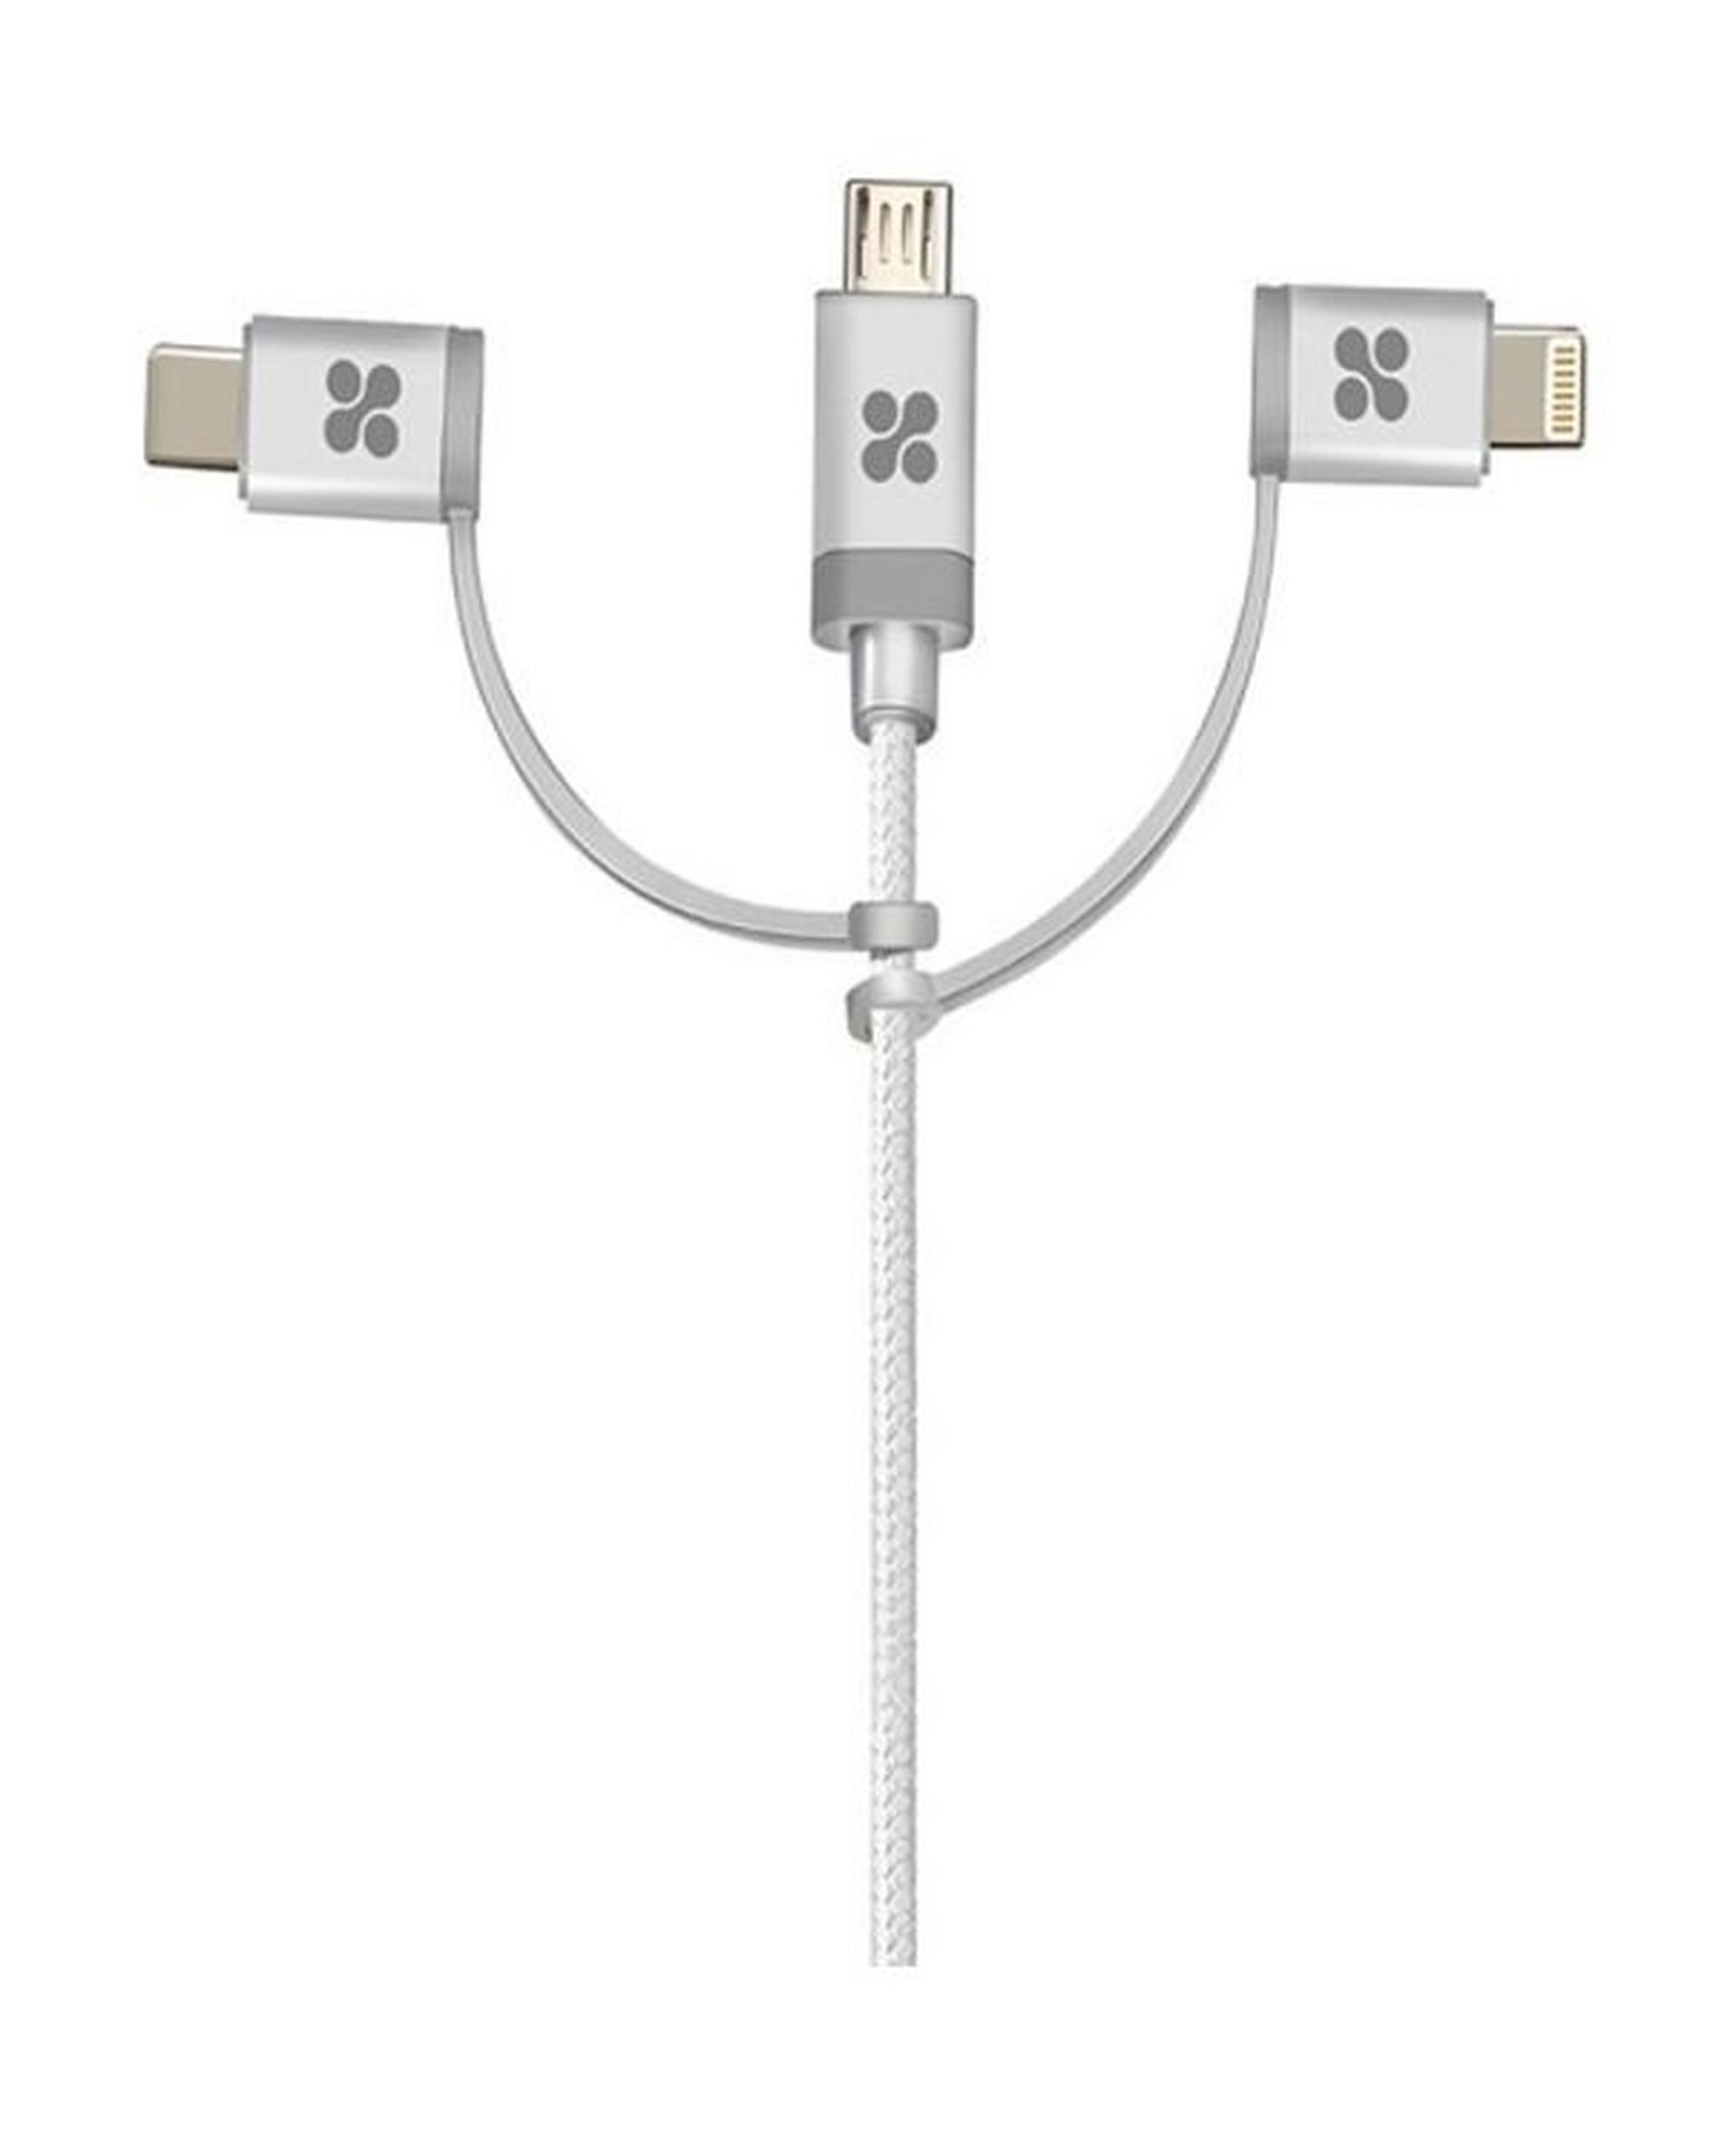 Promate Unilink-TRIO 3-in-1 Multifunctional Universal Sync and Charge Cable 1M - White